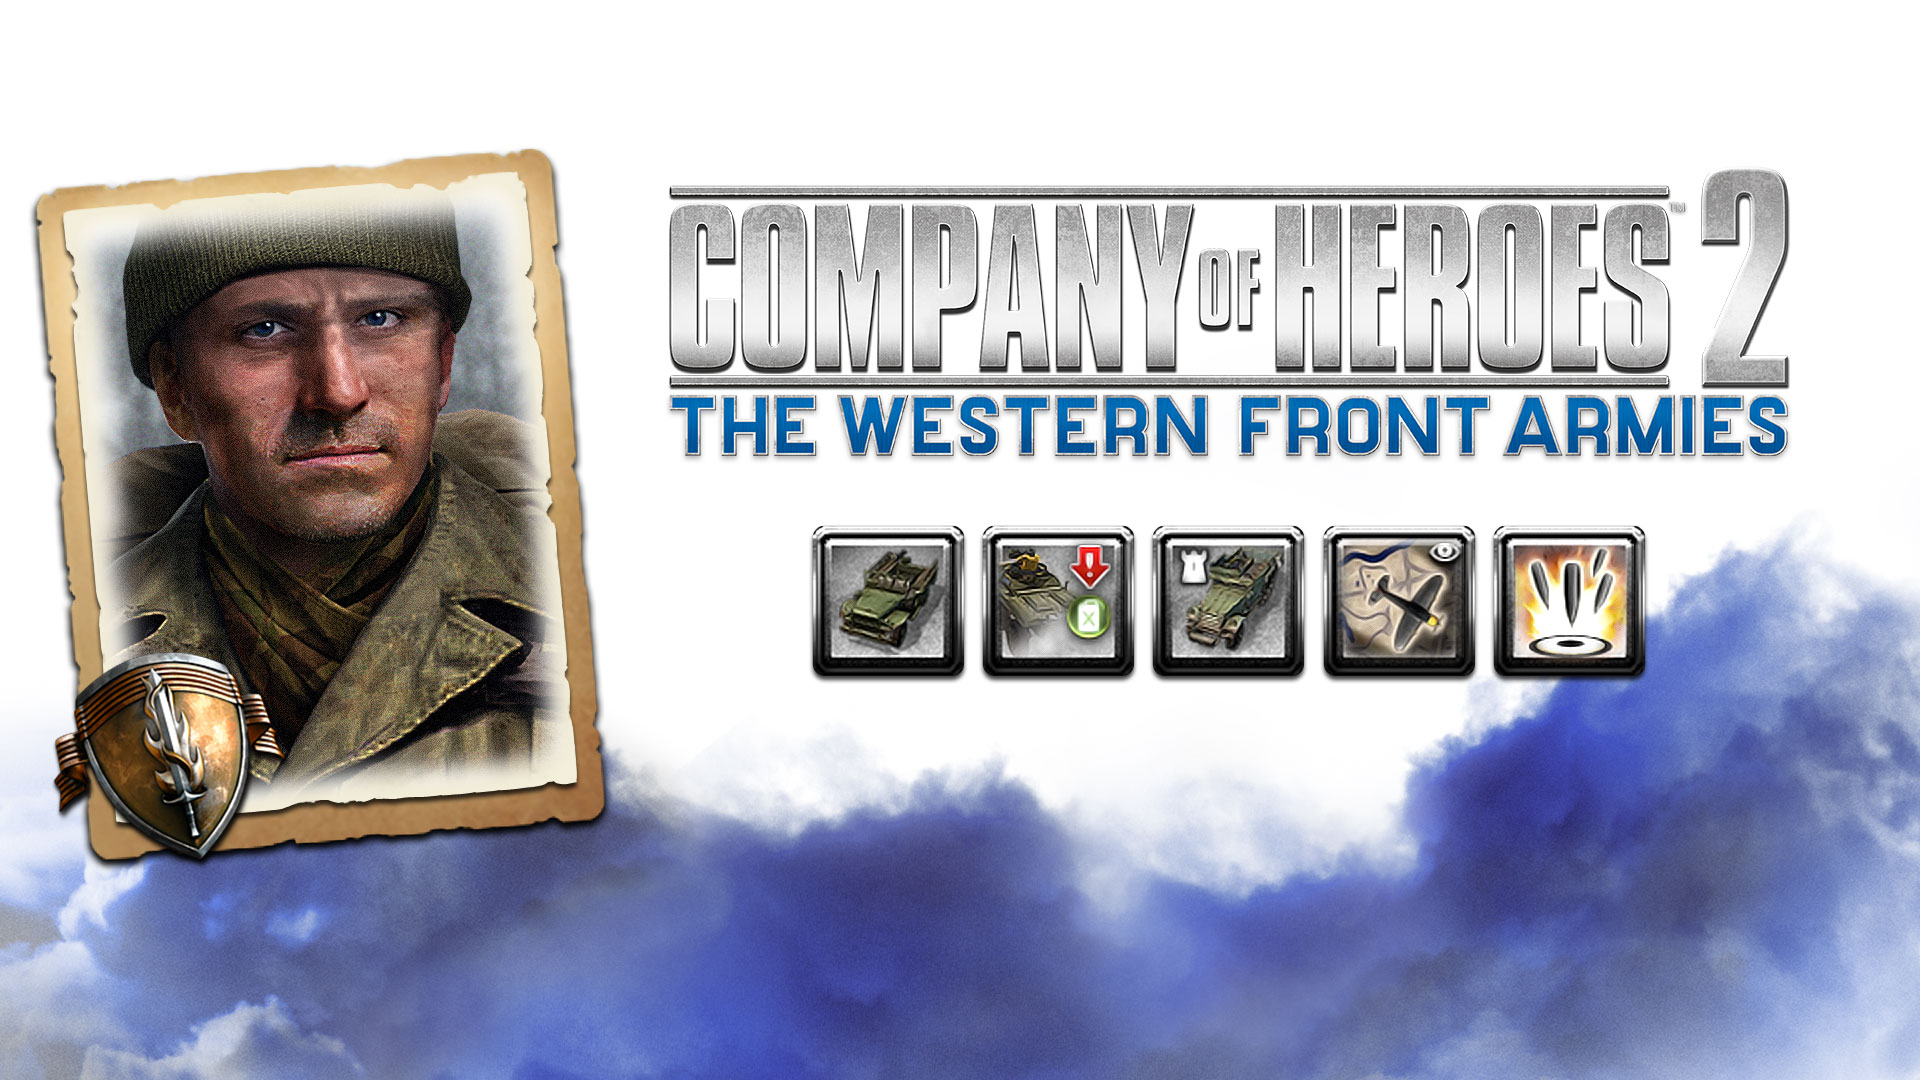 Company of Heroes 2 - US Forces Commanders Collection DLC Steam CD Key 4.17$